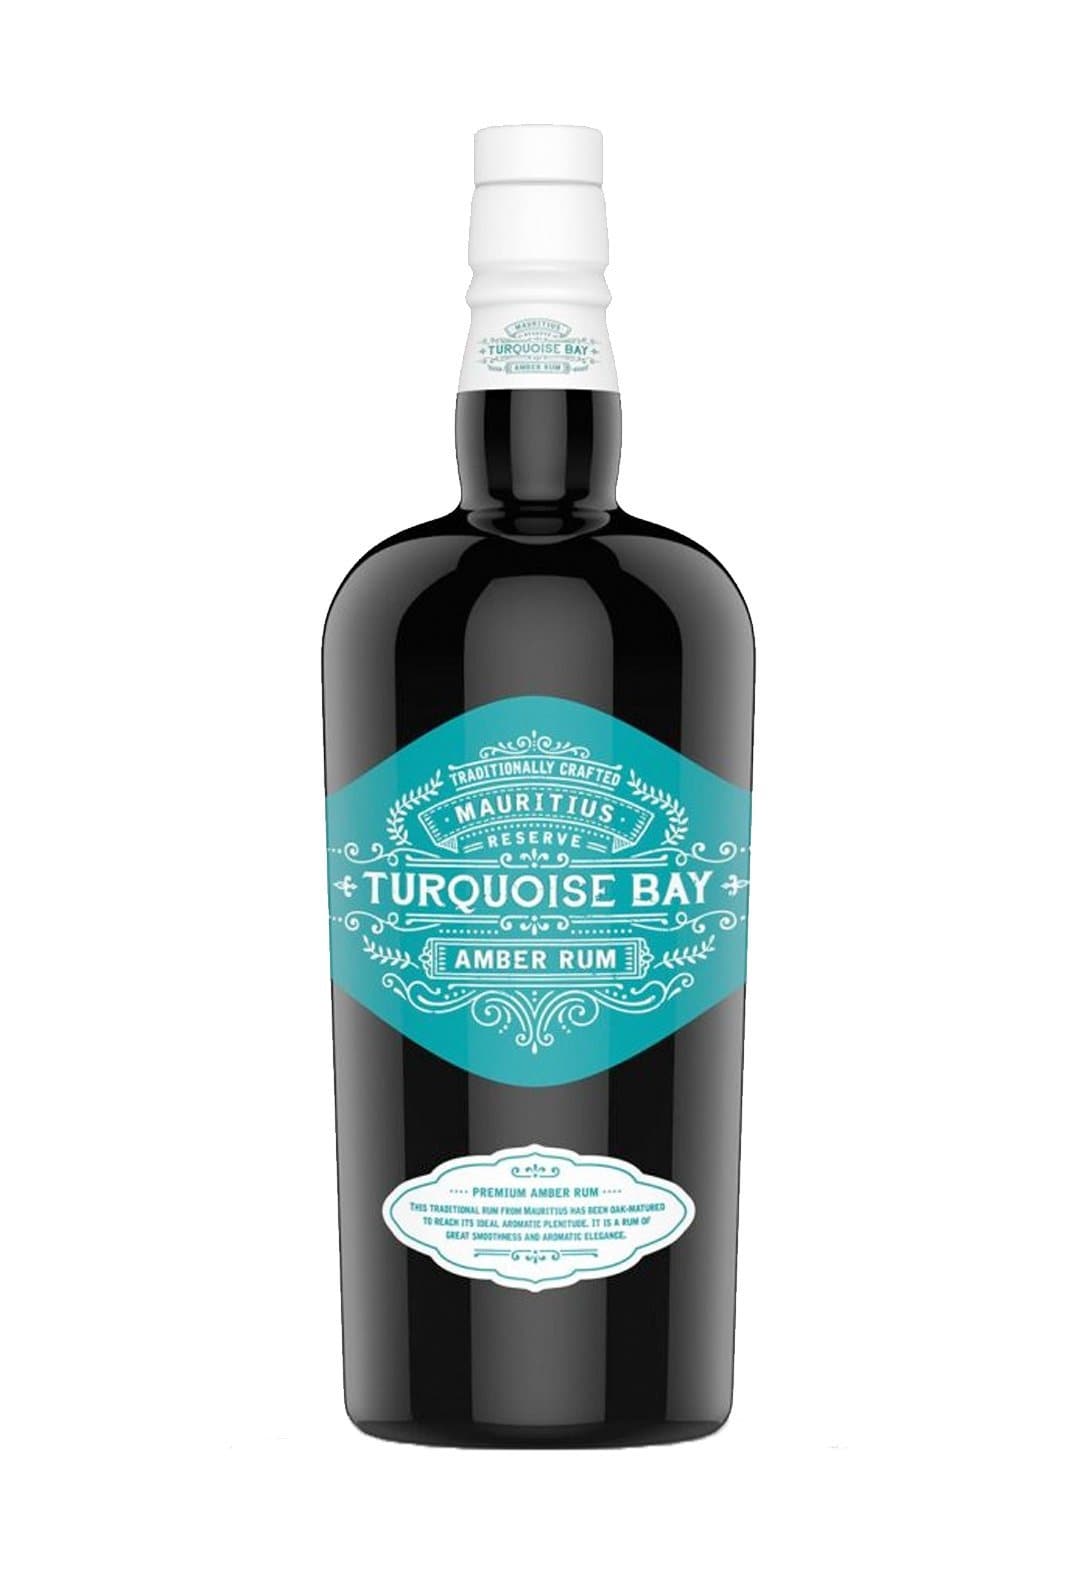 Turquoise Bay Amber Rum Mauritius 40% 700ml | Rum | Shop online at Spirits of France